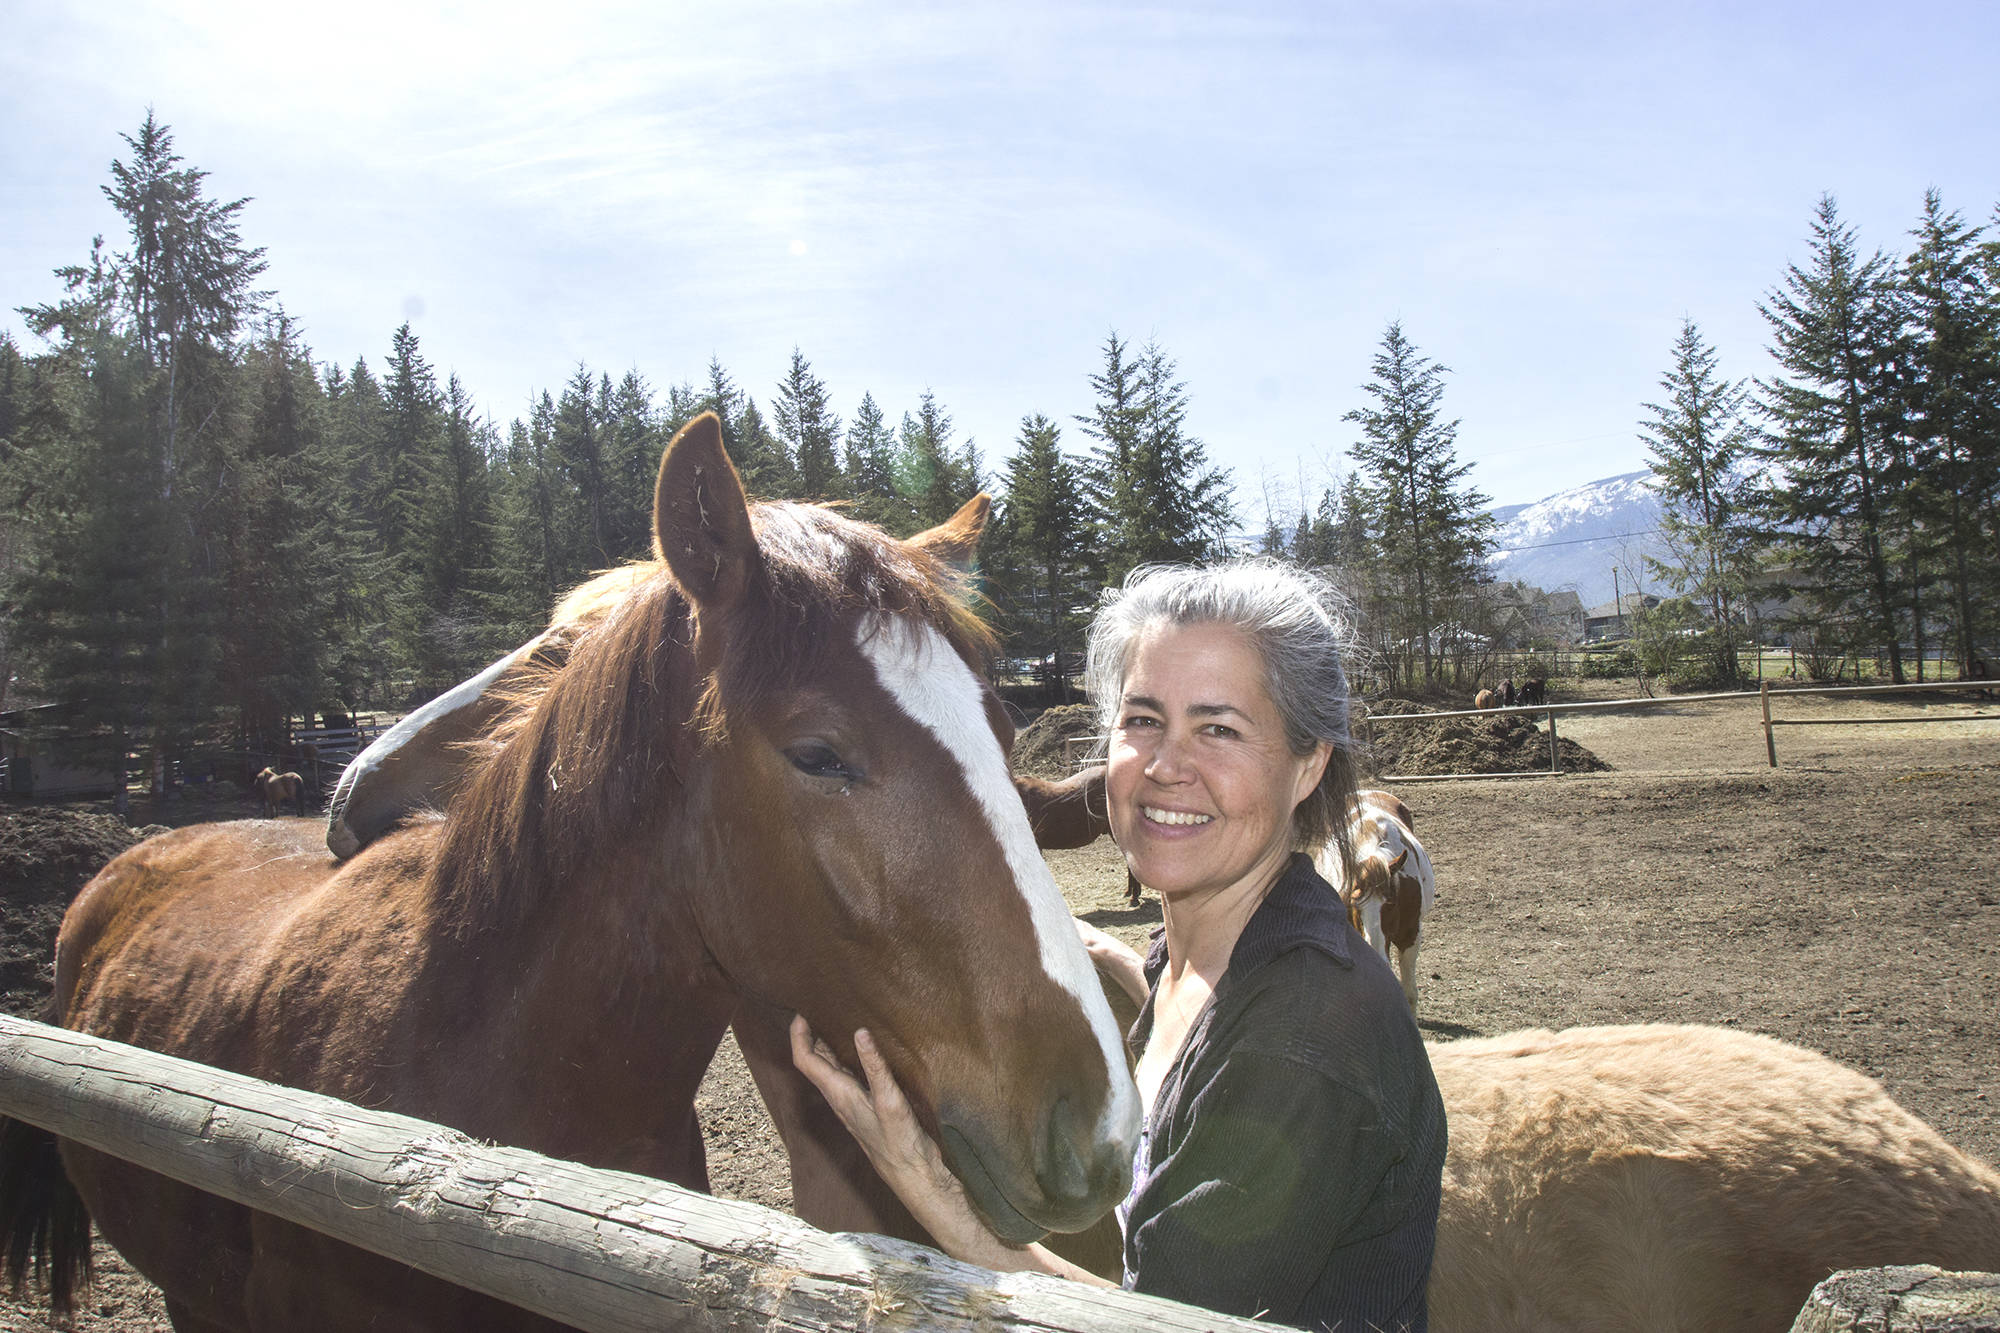 Belinda Lyall, founder of the B.C Horse Angels, makes daily trips to care for over 30 horses she has rescued and put up for adoption. She is pictured here with Bunny, a young mare who is just closing in on her first birthday. (Jodi Brak/Salmon Arm Observer)